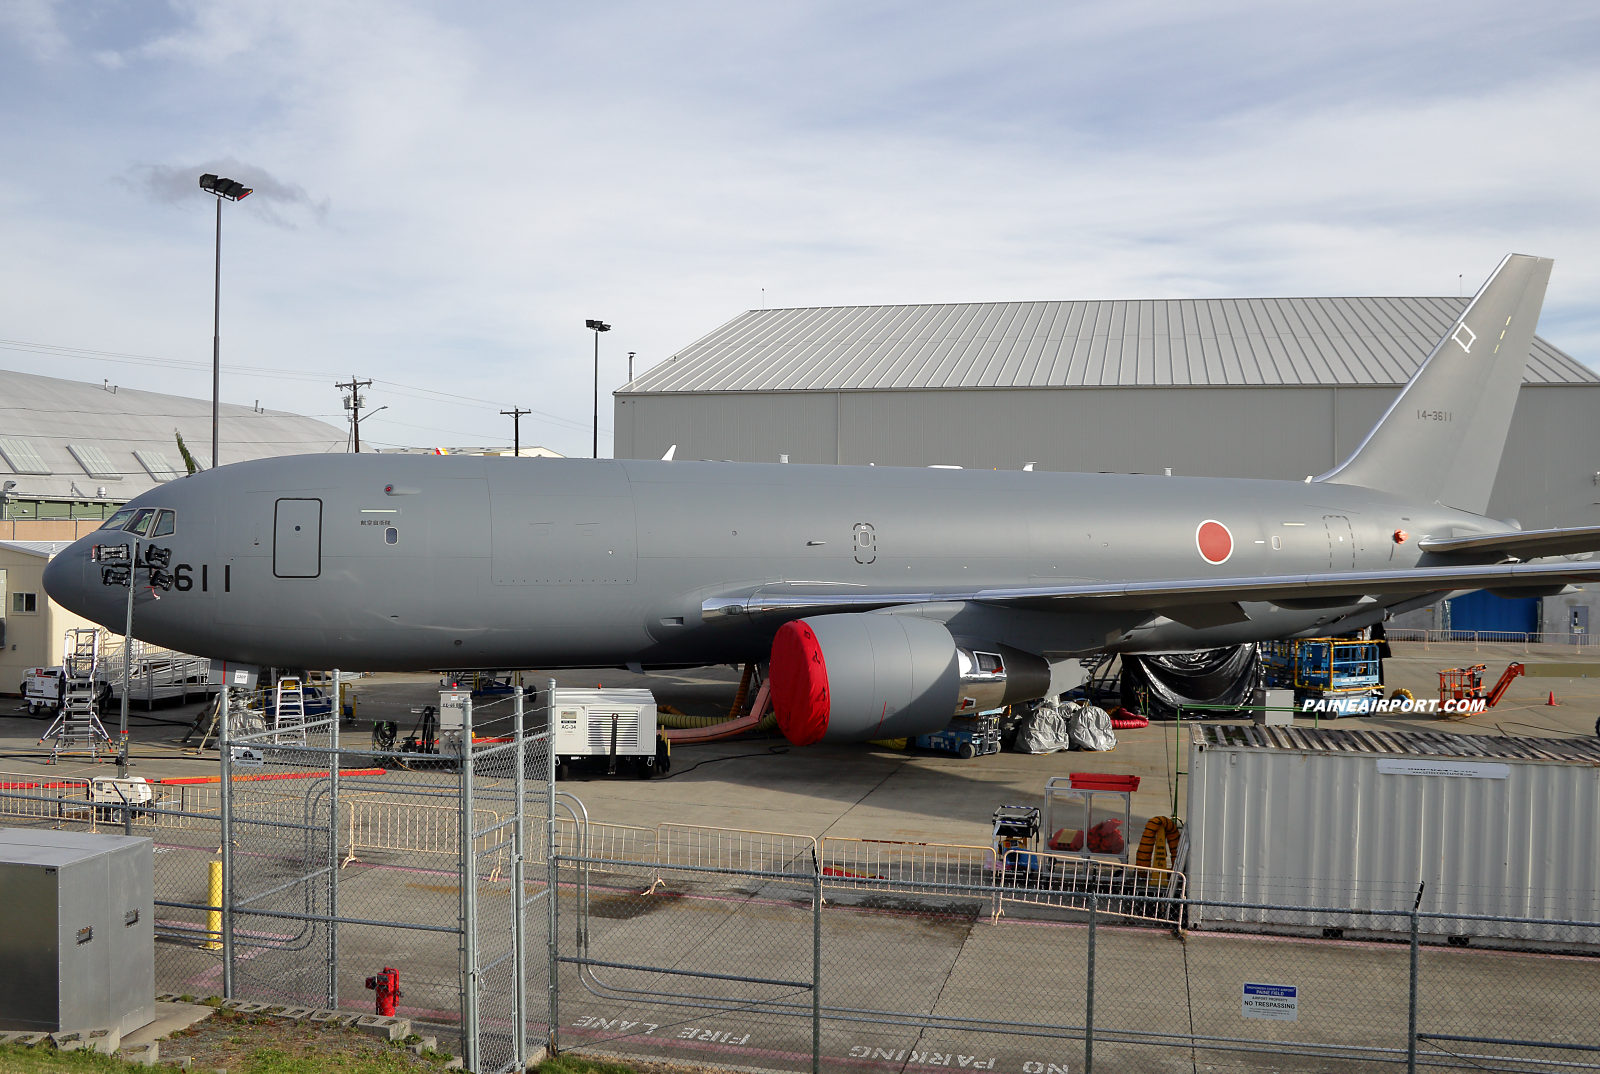 JASDF KC-46A 14-3611 at KPAE Paine Field